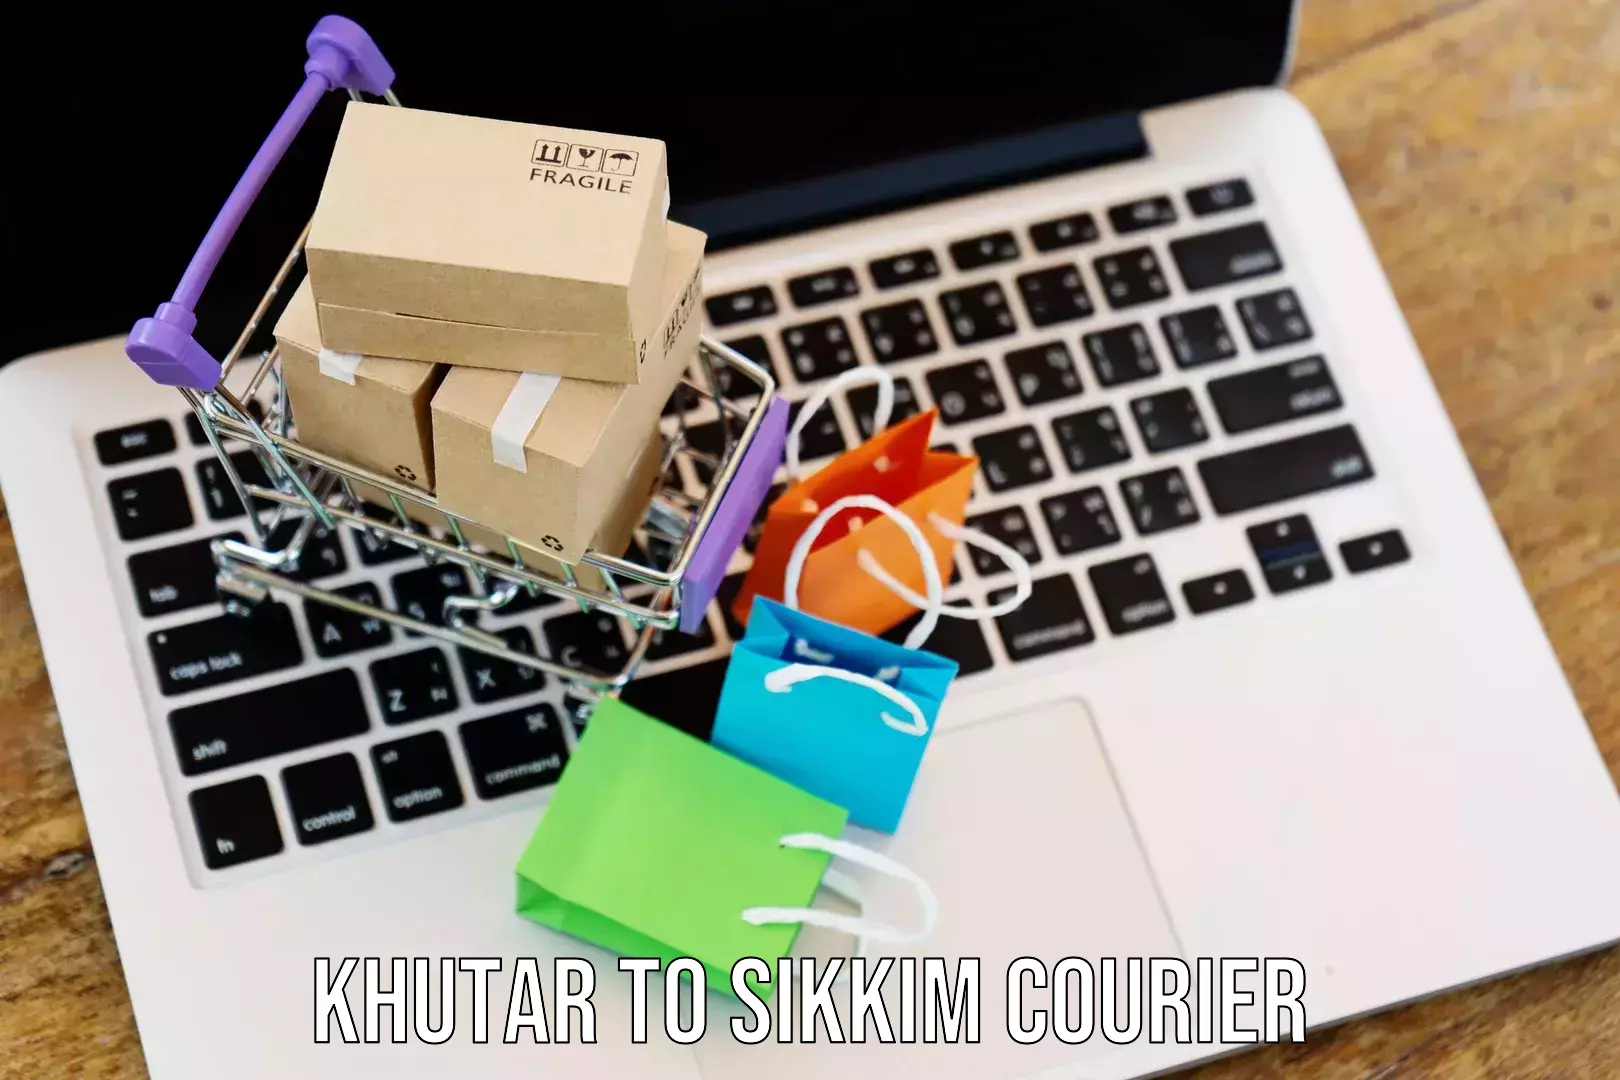 Digital shipping tools Khutar to Pelling